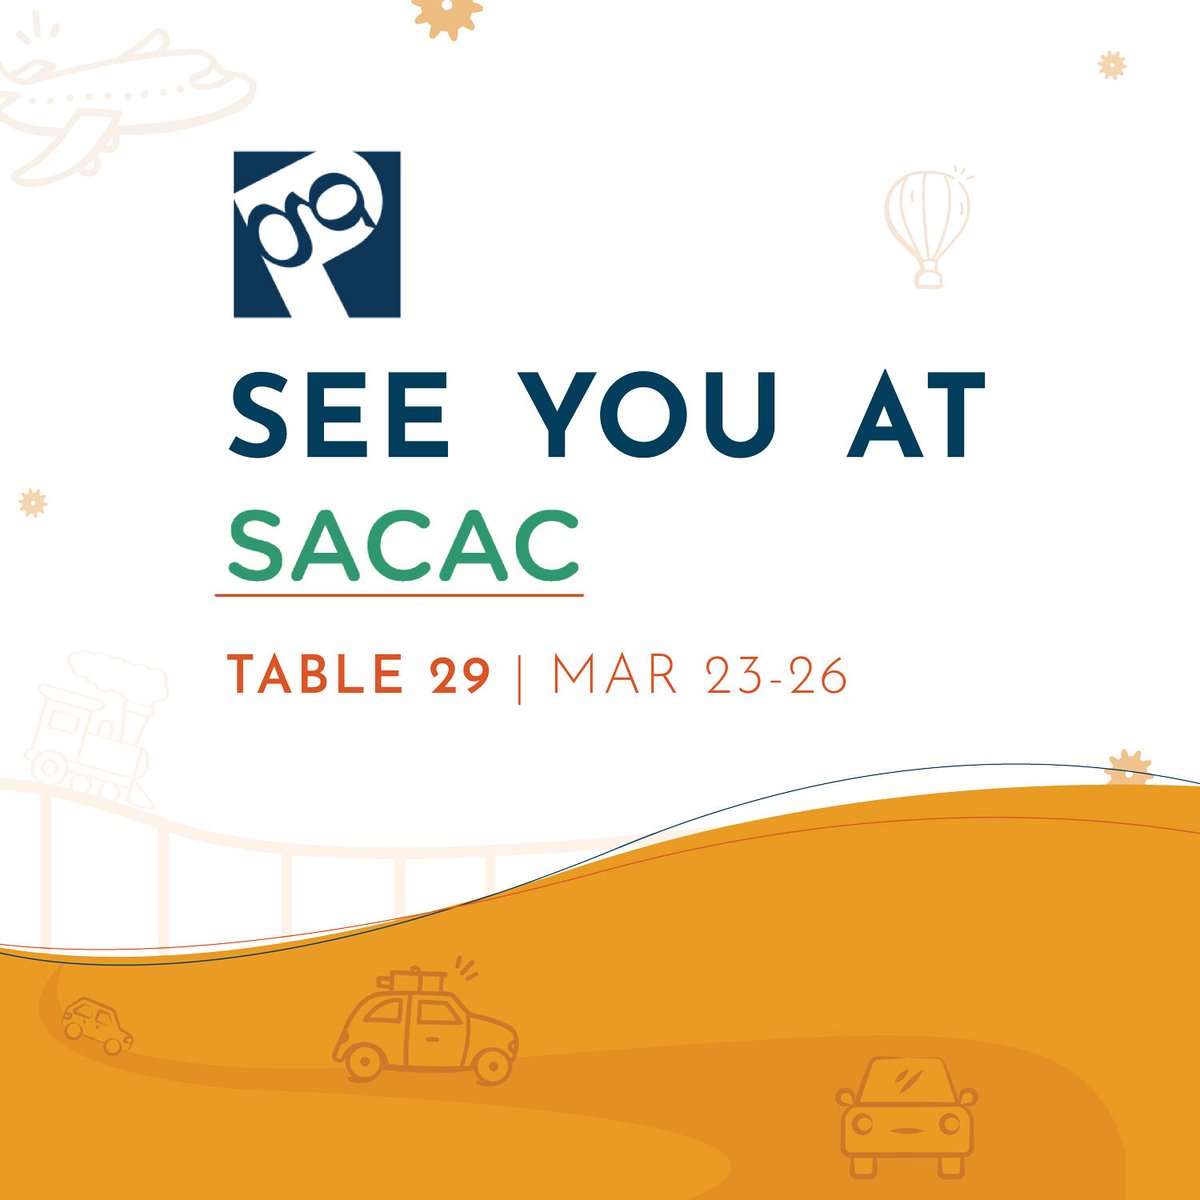 #SACAC is almost here 🙌

Let us know if you'll be in Raleigh!

#emchat #hemktg